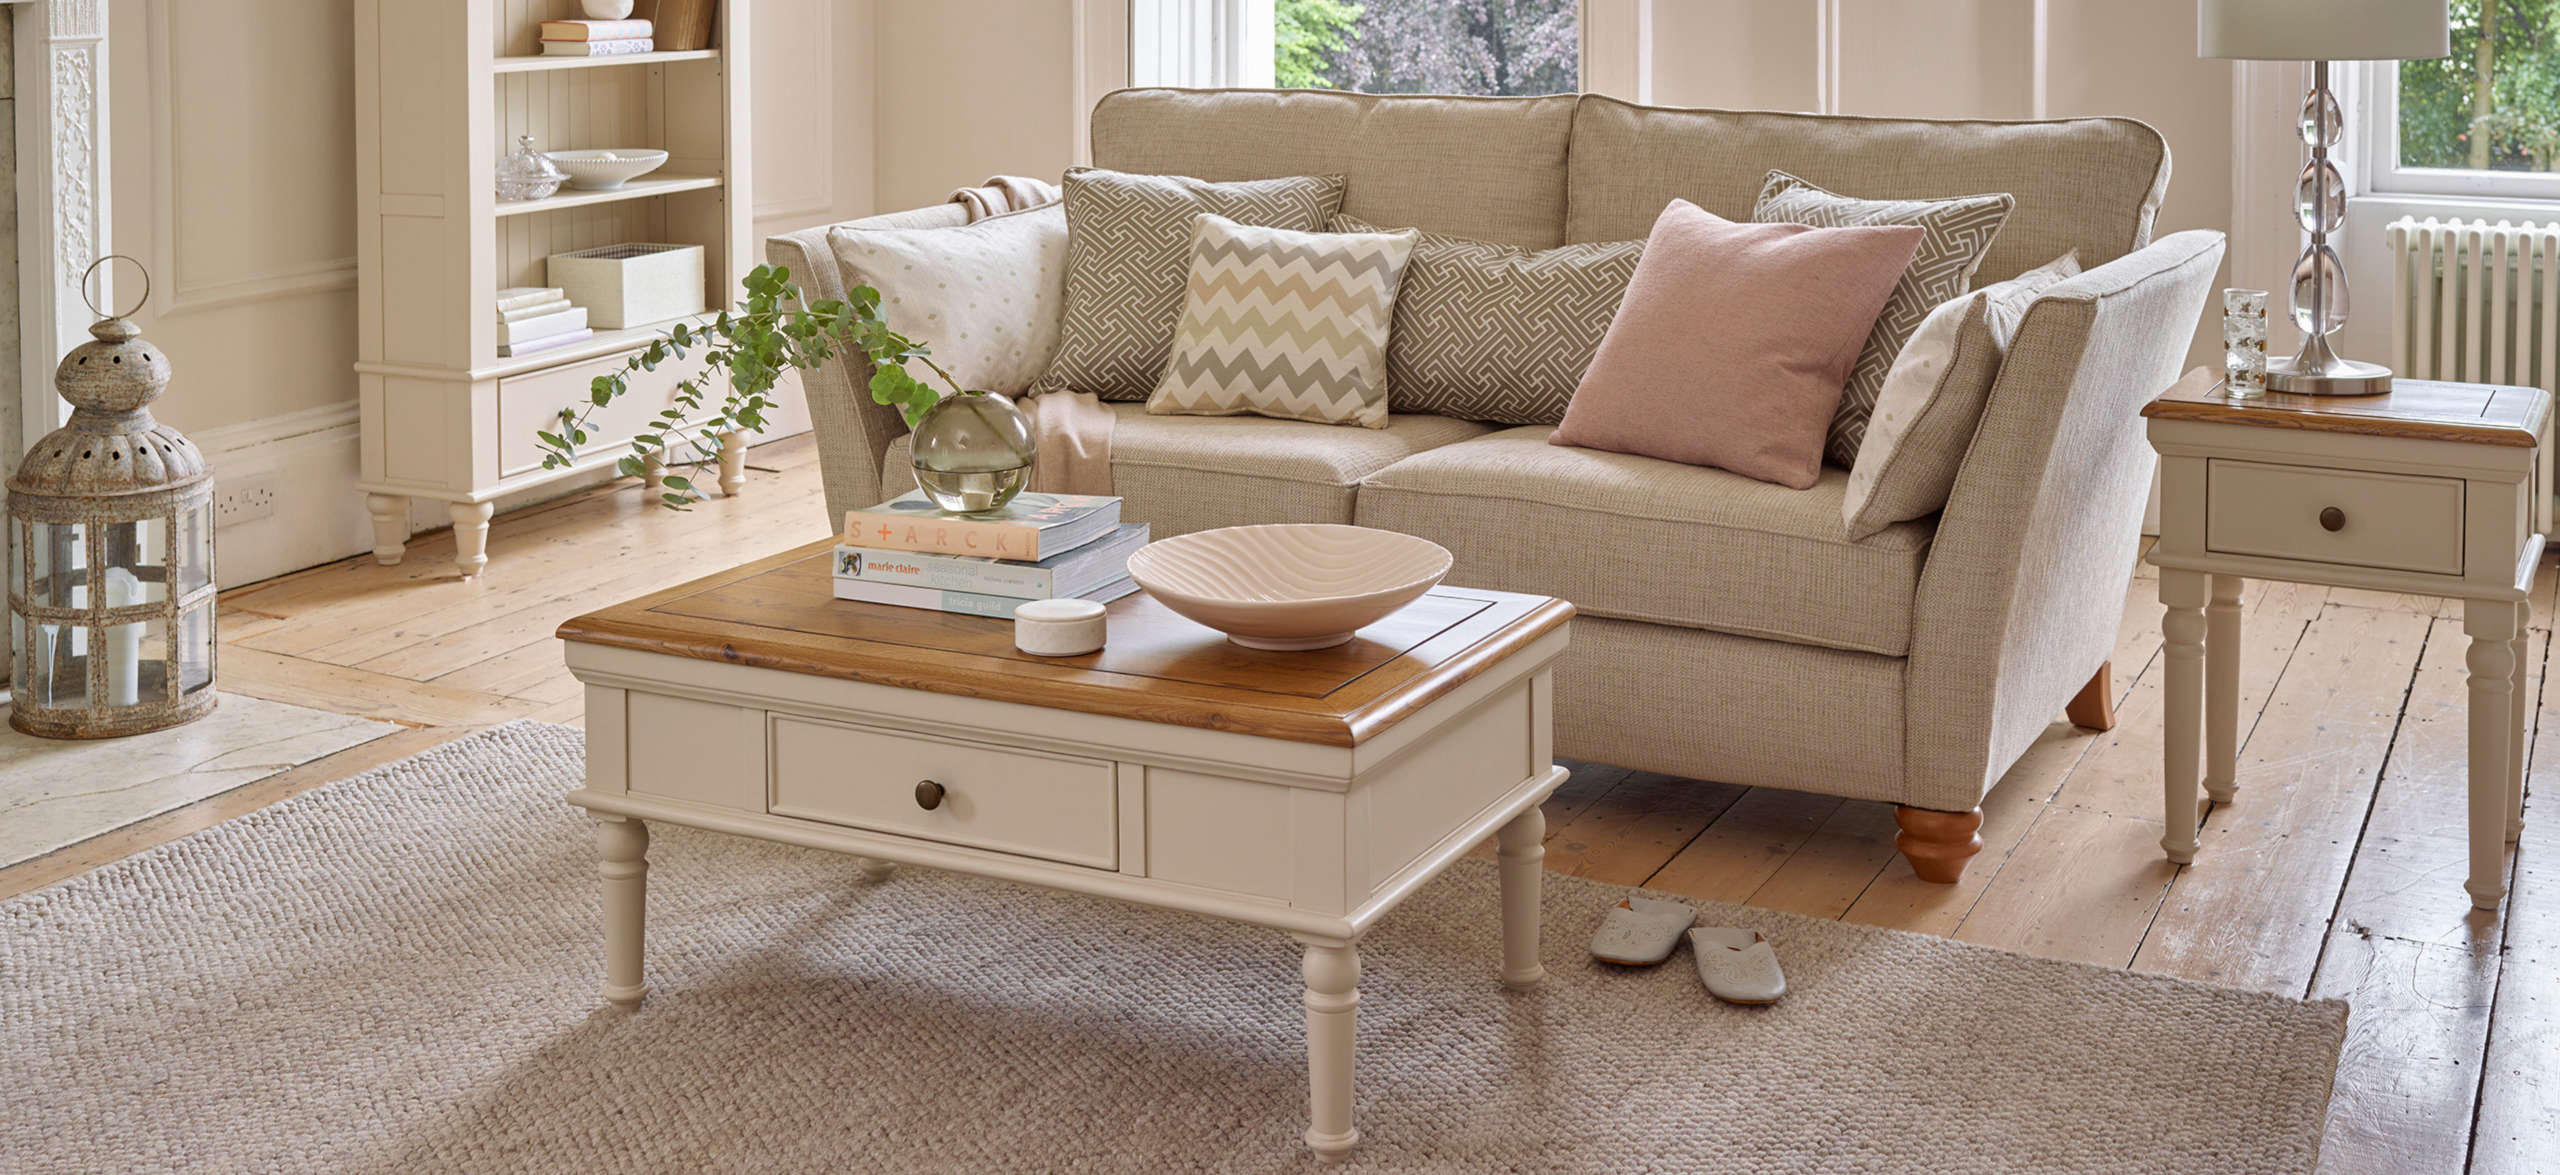 Hercules solid oak coffee table in traditional living room